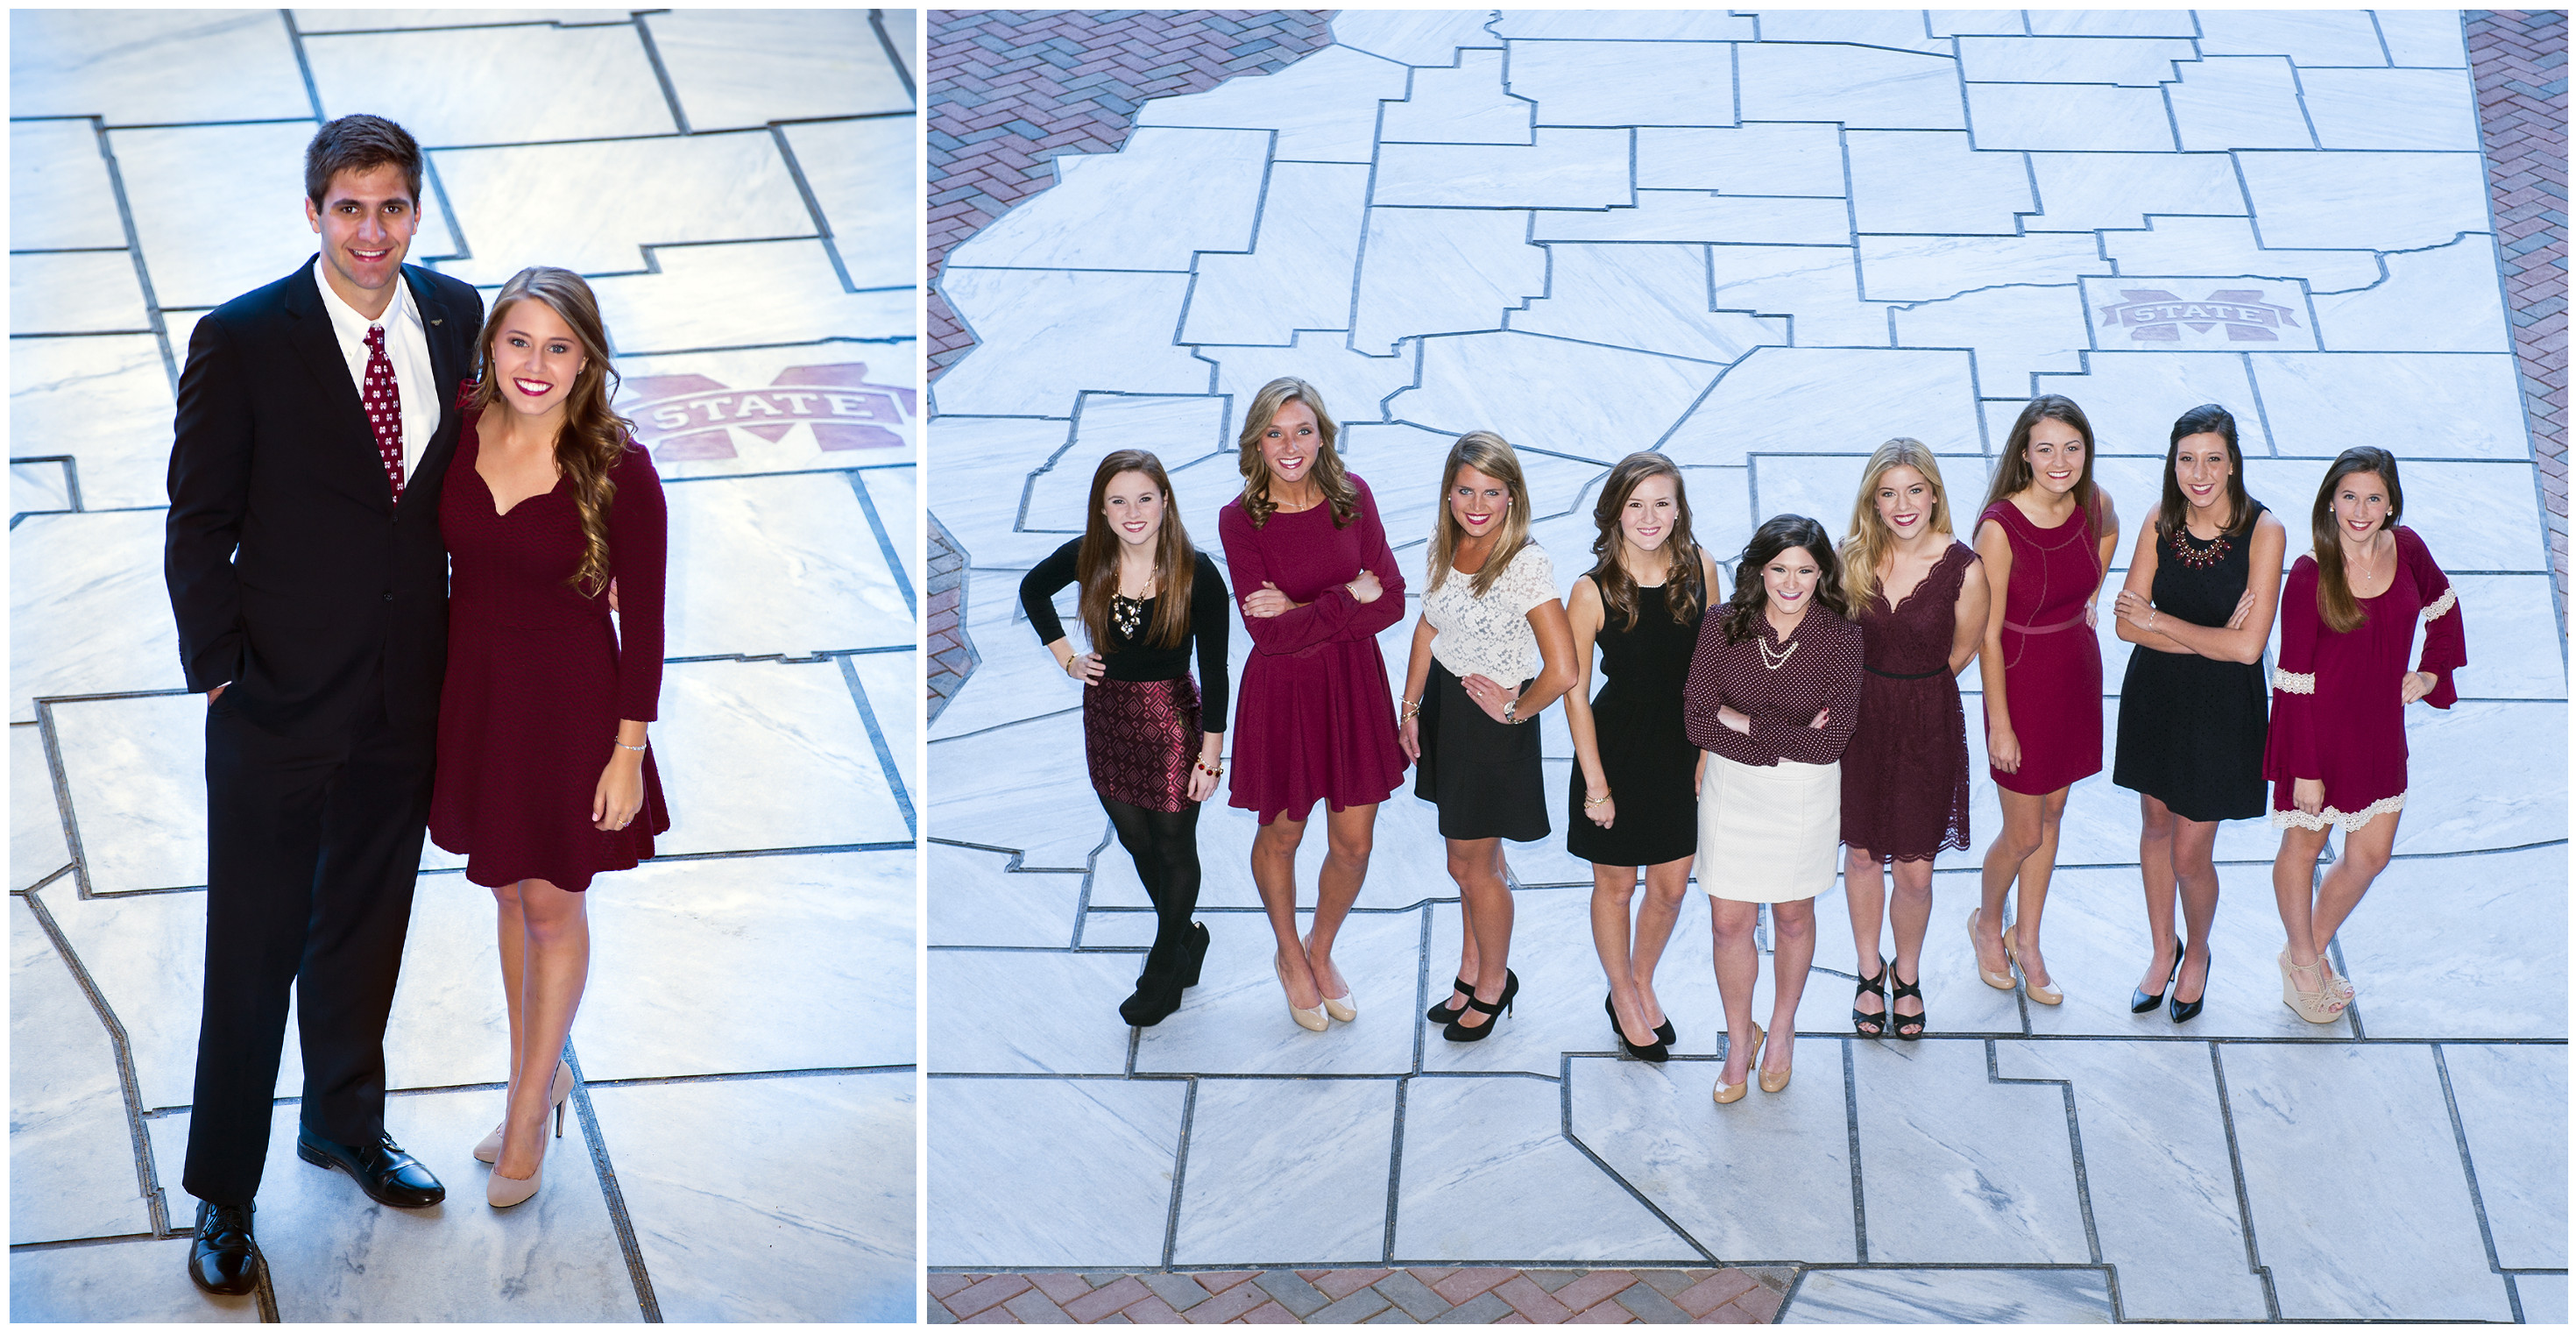 Left: Jonathan Lancaster of Jackson is Mr. Mississippi State University, while Haley Grantham of Star is Miss MSU. Both seniors, they were chosen in recent campus-wide elections. Right: Mississippi State's 2014 Homecoming Court includes, left to right, freshman maid Bell Hester of Starkville; sophomore maid Anna Claire Allison of Ocean Springs; junior maid Kelsey Jones of Madison; senior Mary Gates Talbot of Nesbit; queen Katharine "Katie" McCummins of Long Beach; senior maid Alissa McKinnon of Greenville; junior maid Jaslyn Langford of Calhoun City; sophomore maid Chloe Sullivan of Franklin, Tennessee; and freshman maid Carrie Gammon of Lithia, Florida.